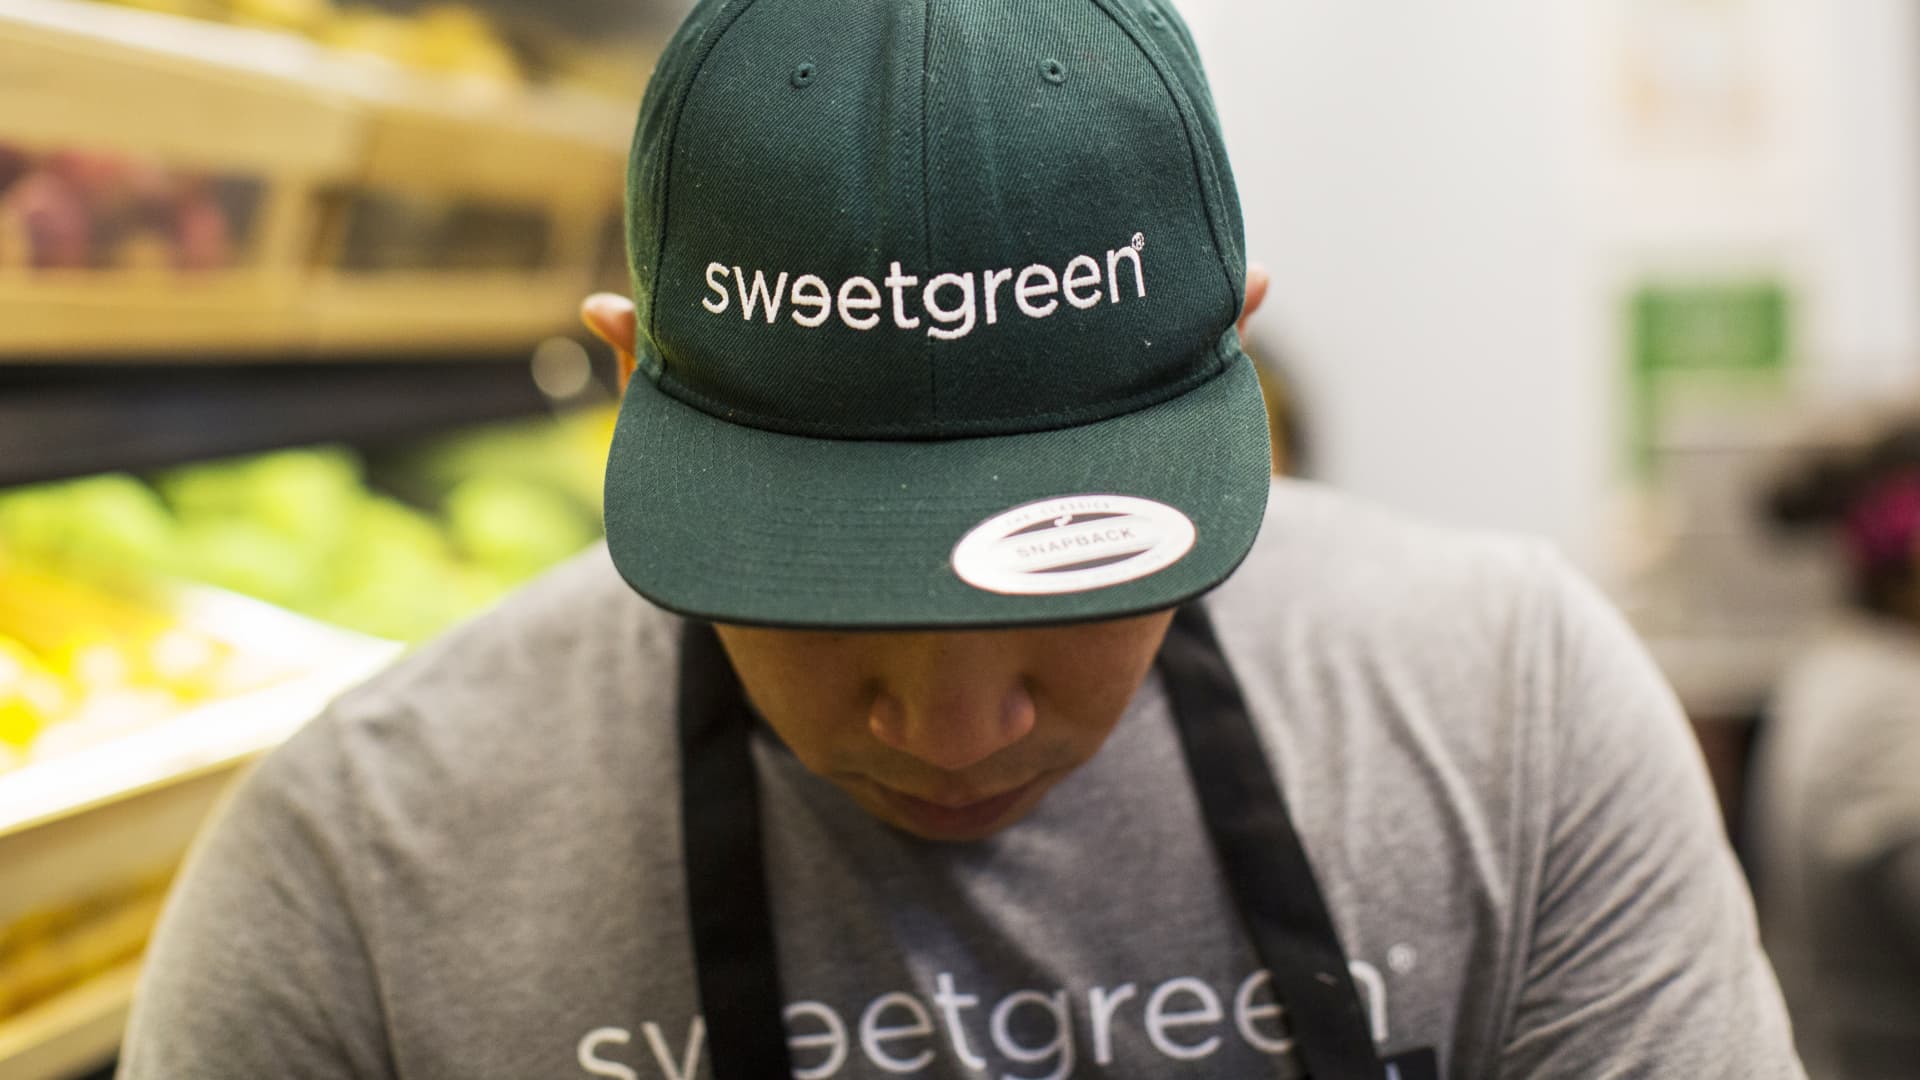 Sweetgreen stock plummets after salad chain lowers forecast, announces layoffs and office downsizing